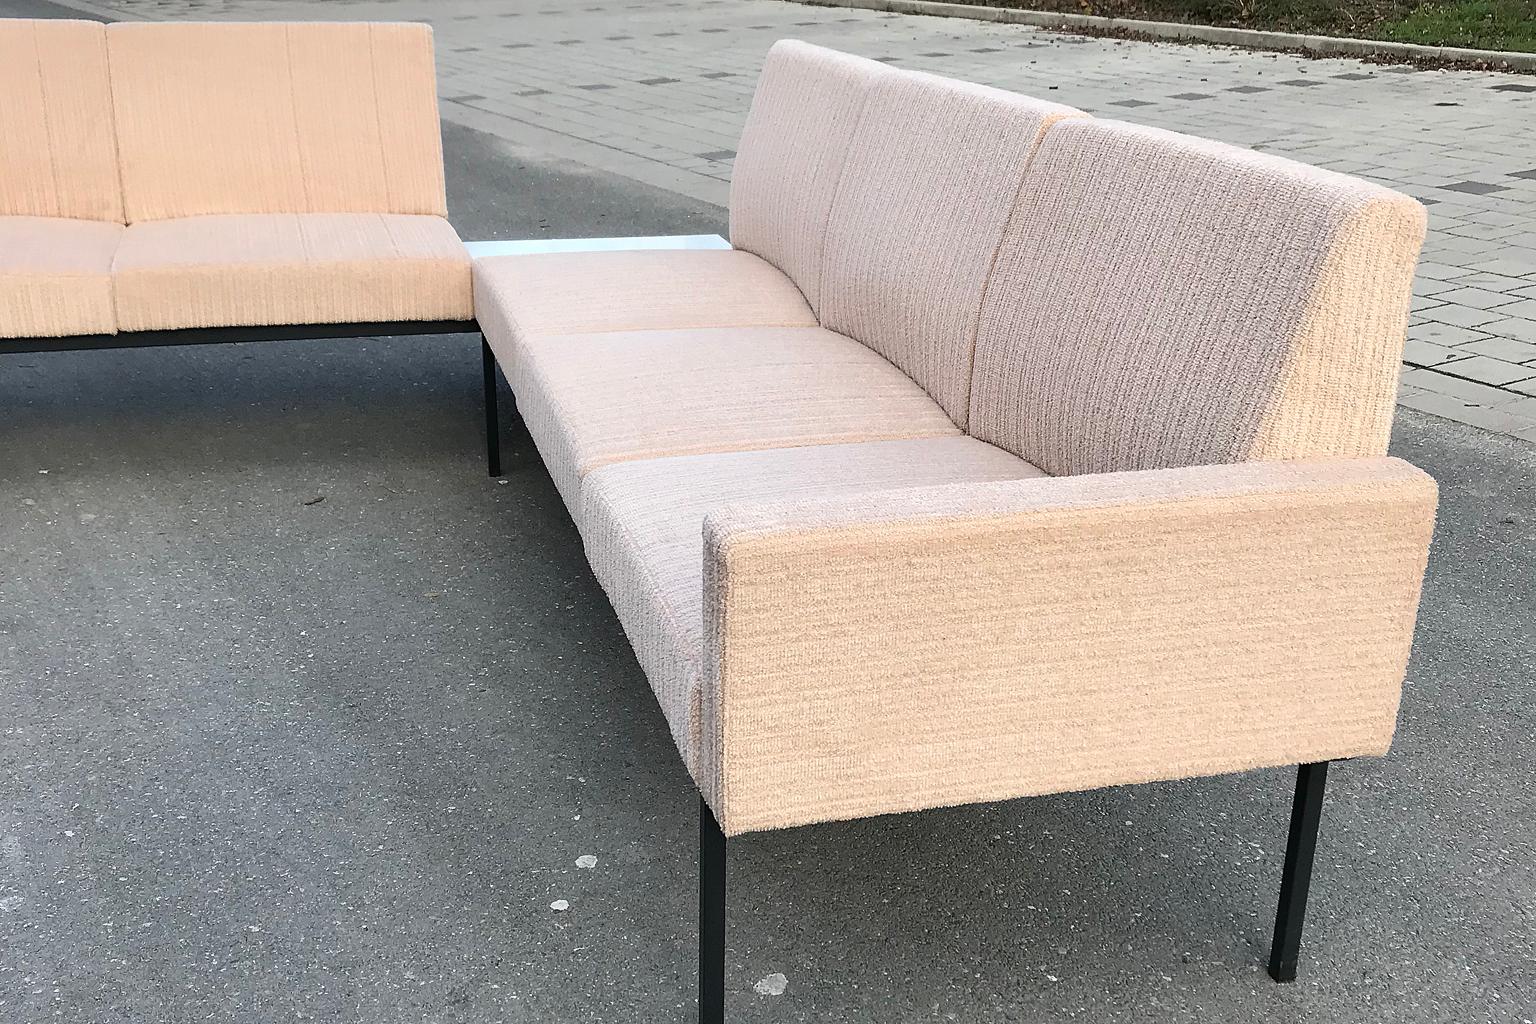 Mid-Century Modern Modular Seating Group from Thonet, 1960s, Seating Elements, Lobby Sofa Beige 